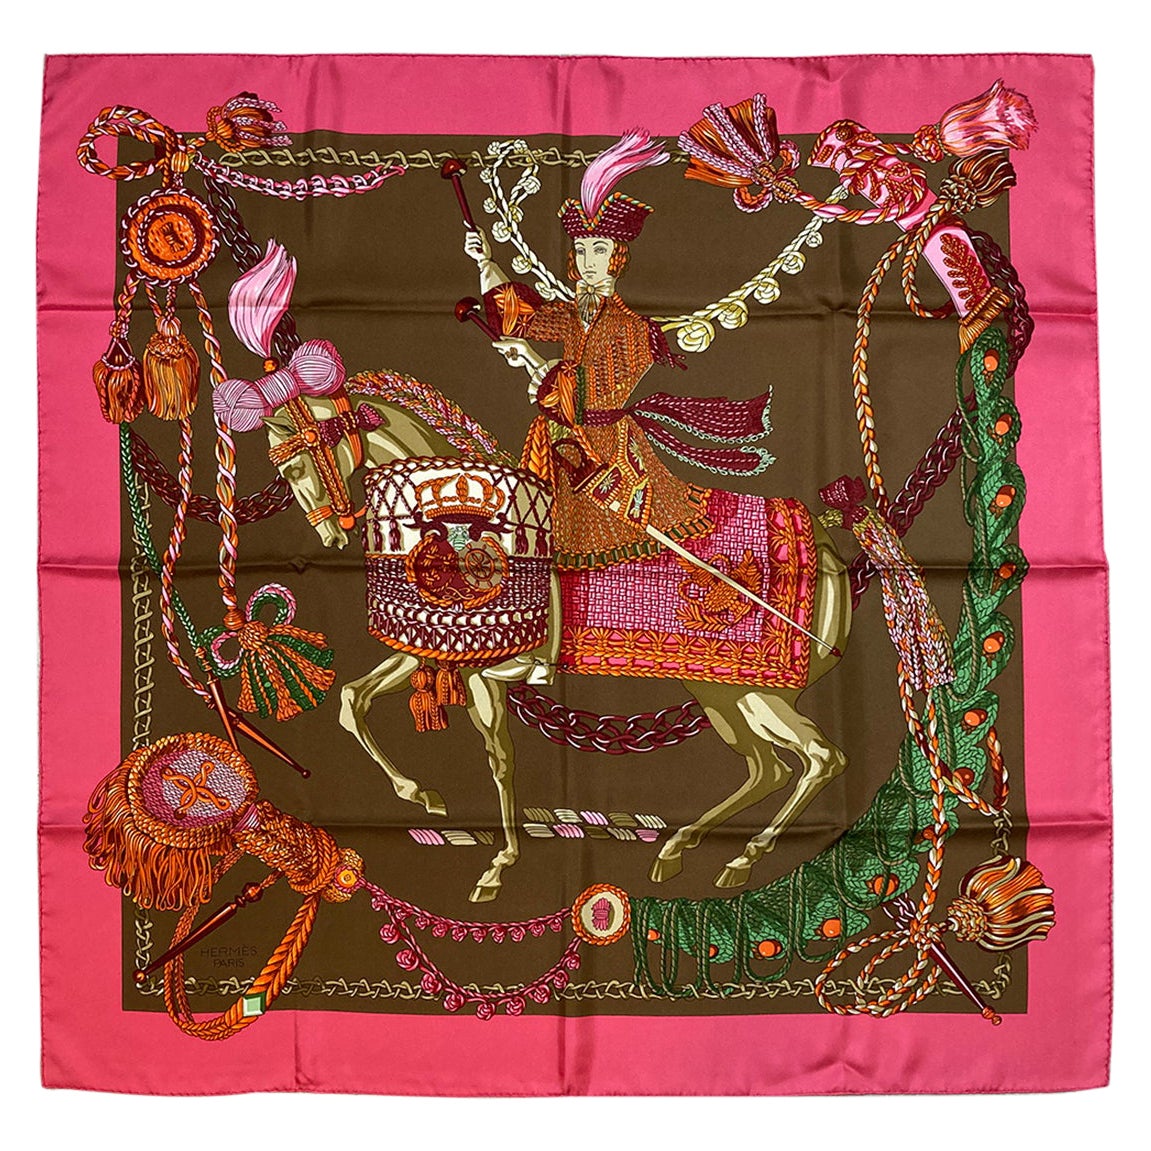 Hermes Le Timbalier Silk Scarf in Pink and Brown c1960s